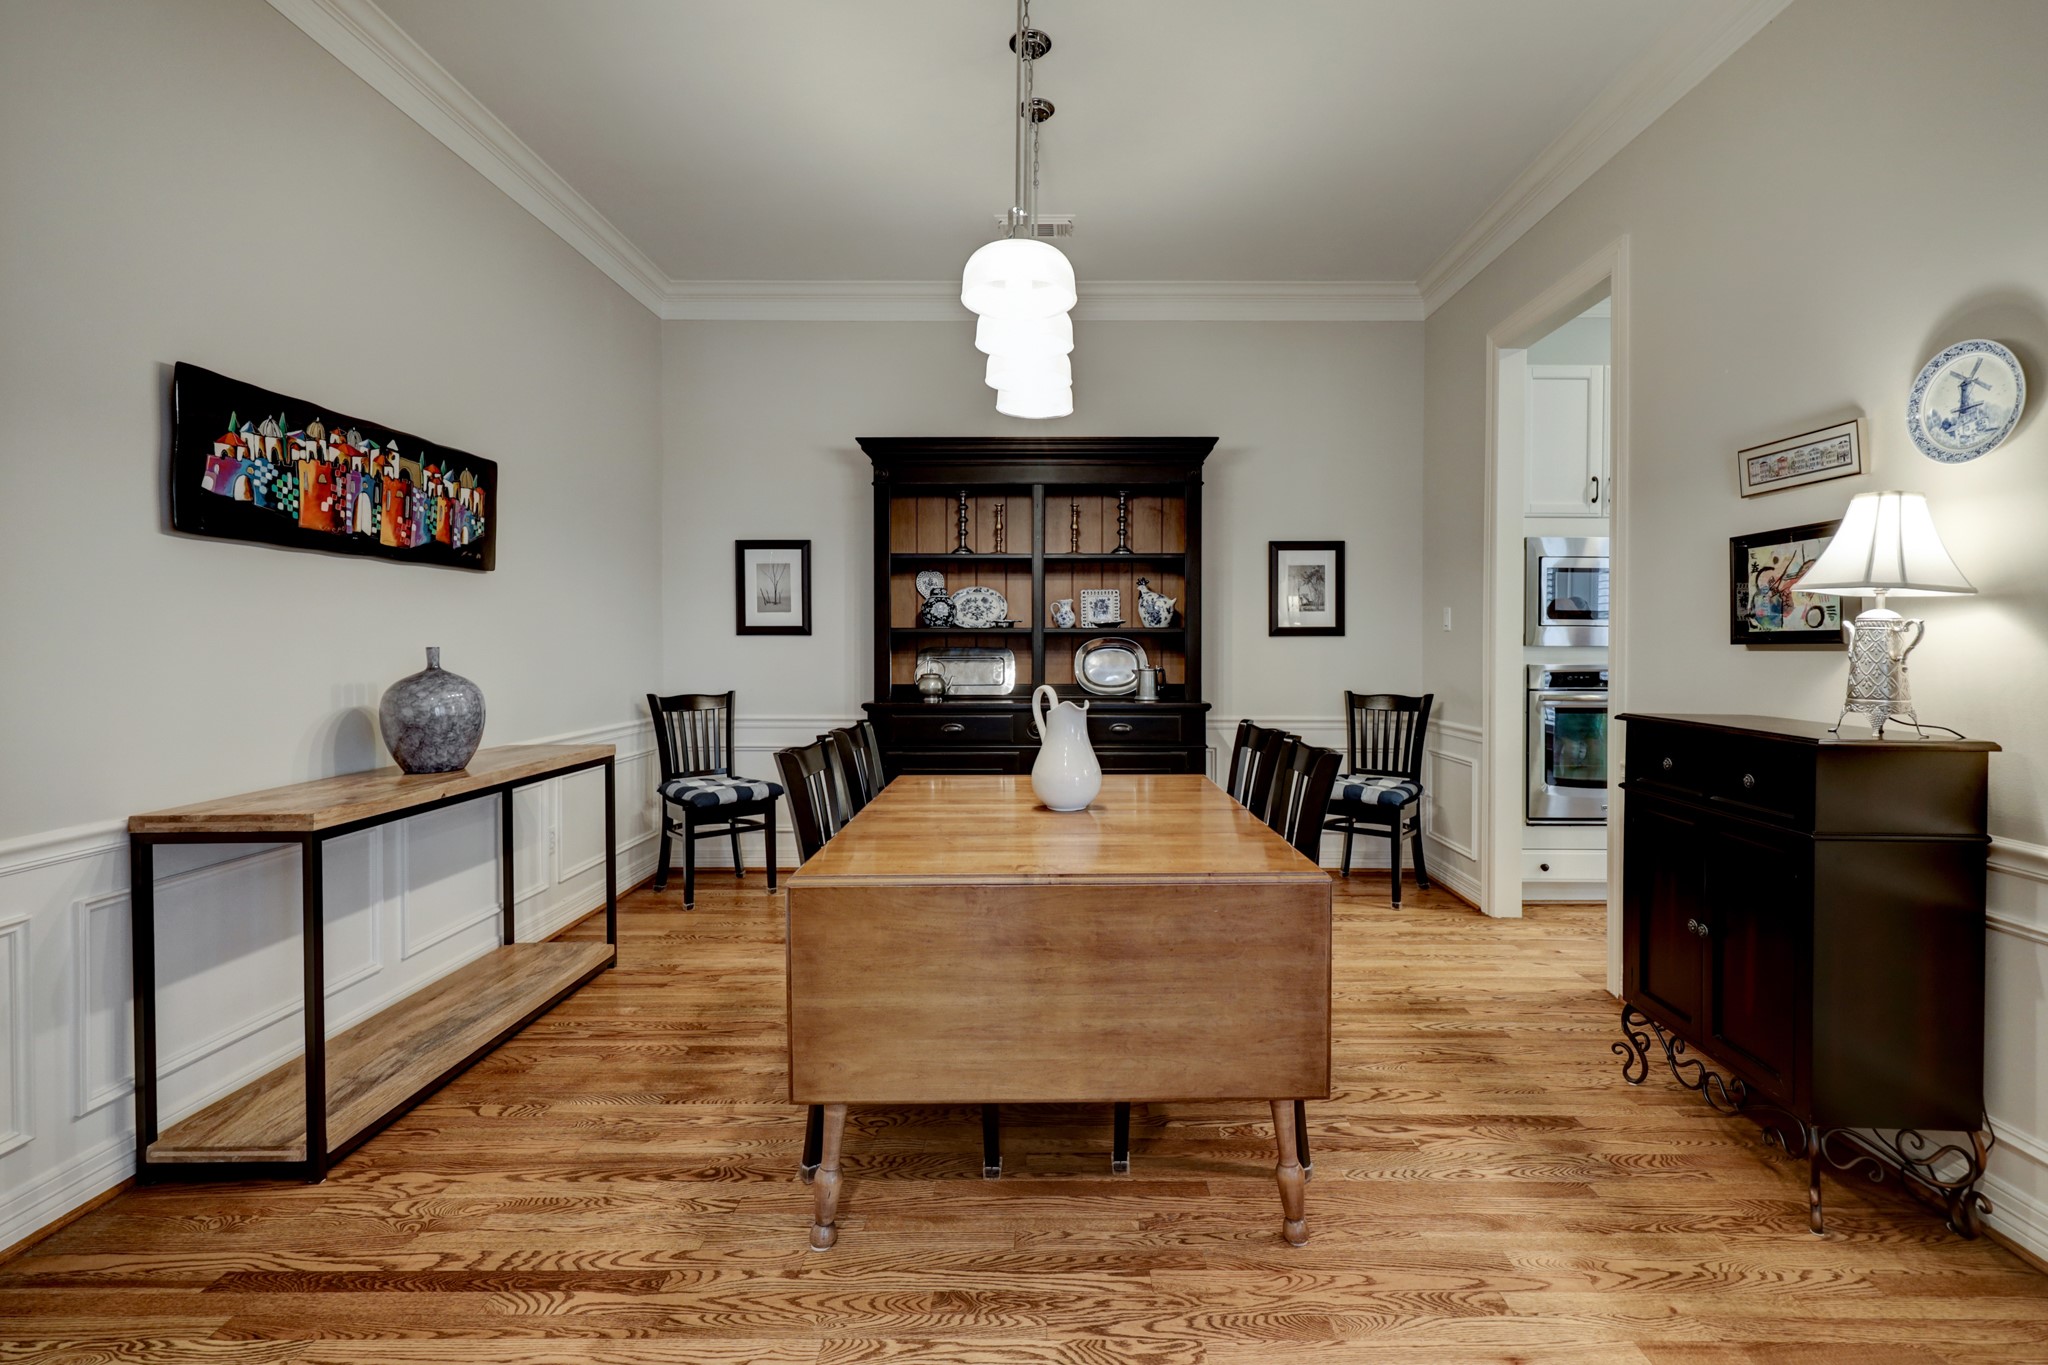 The dining room can easily accommodate a large dining table.